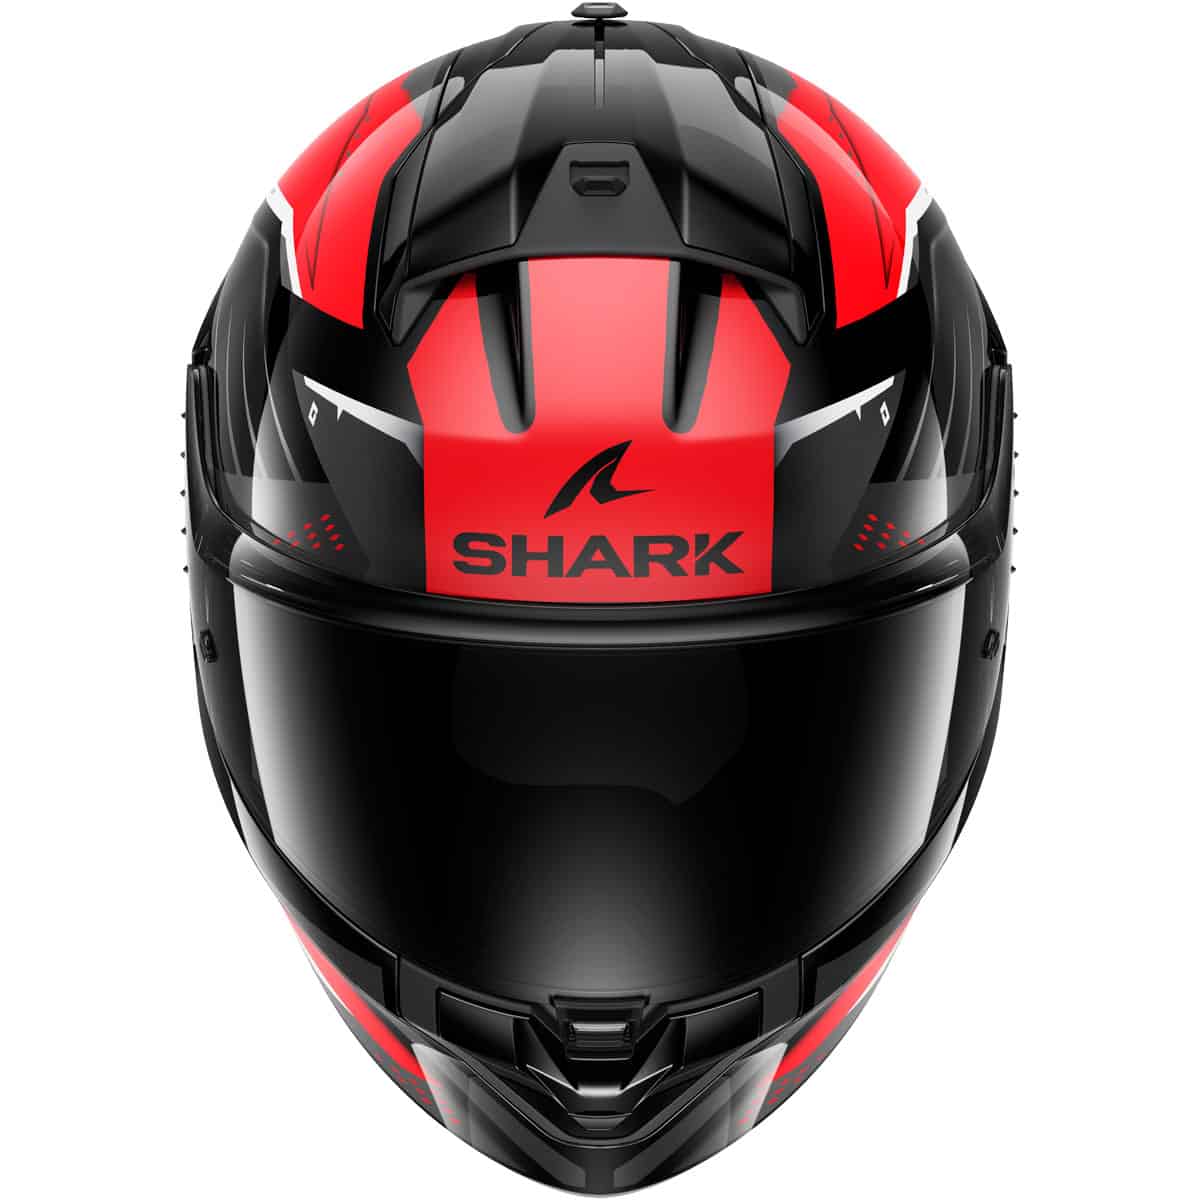 Experience a ride like no other with the Shark Ridill 2 Helmet. This helmet features an all-new design and exceptional features, combining streetwear look air inlets